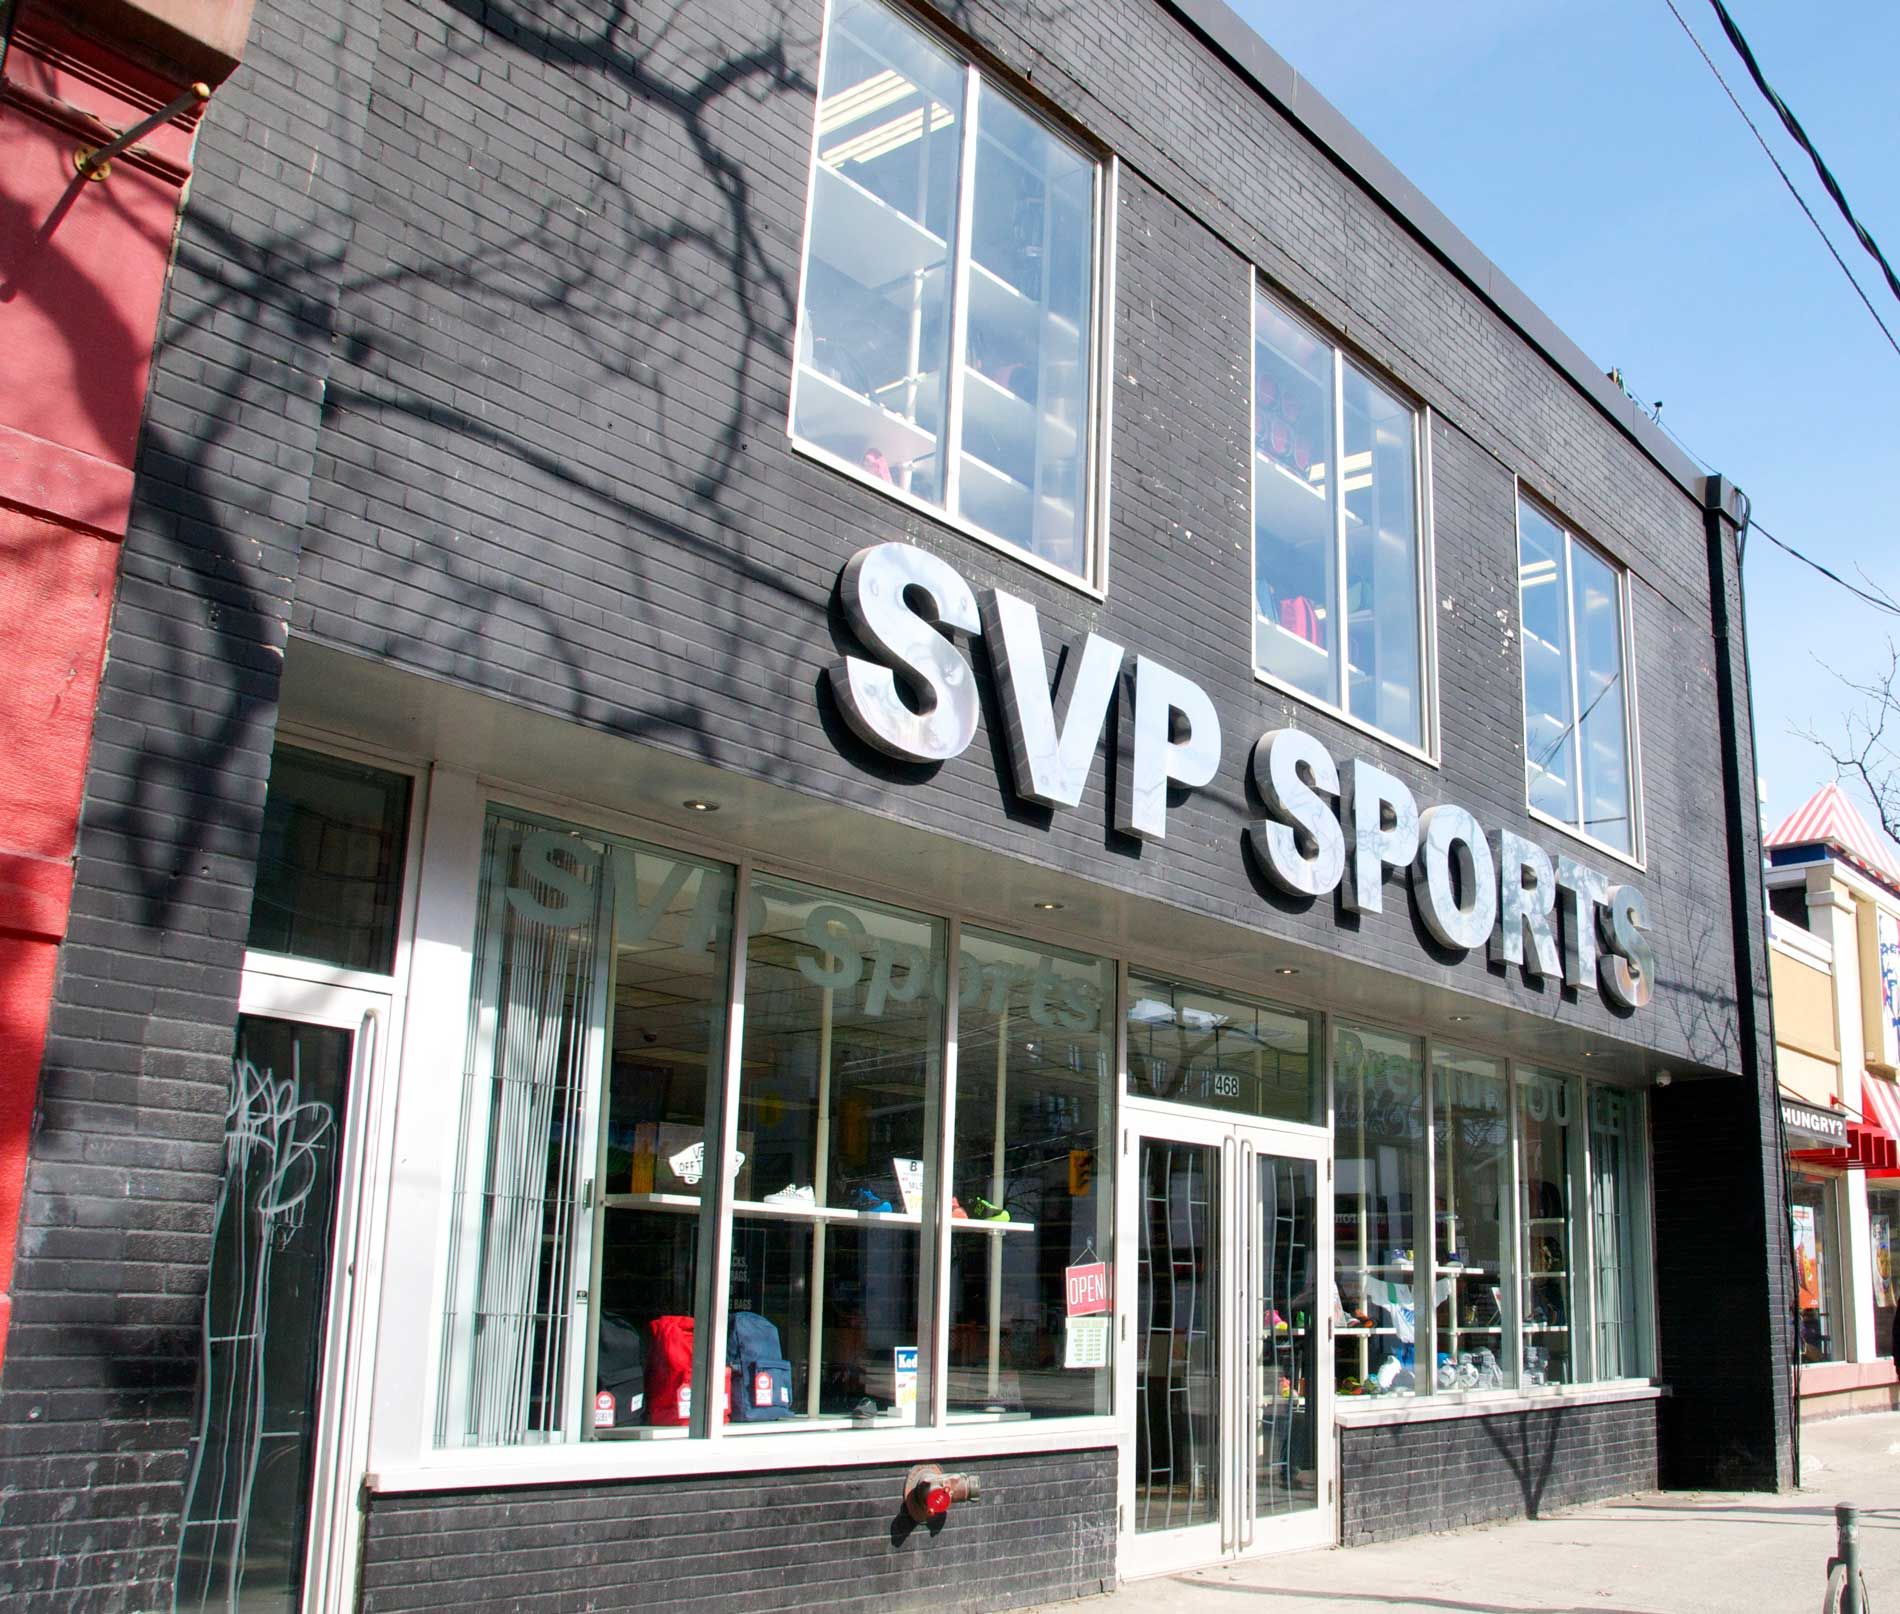 THE WAIT IS FINALLY OVER! 📢 SVP SCARBOROUGH SUPERSTORE IS NOW